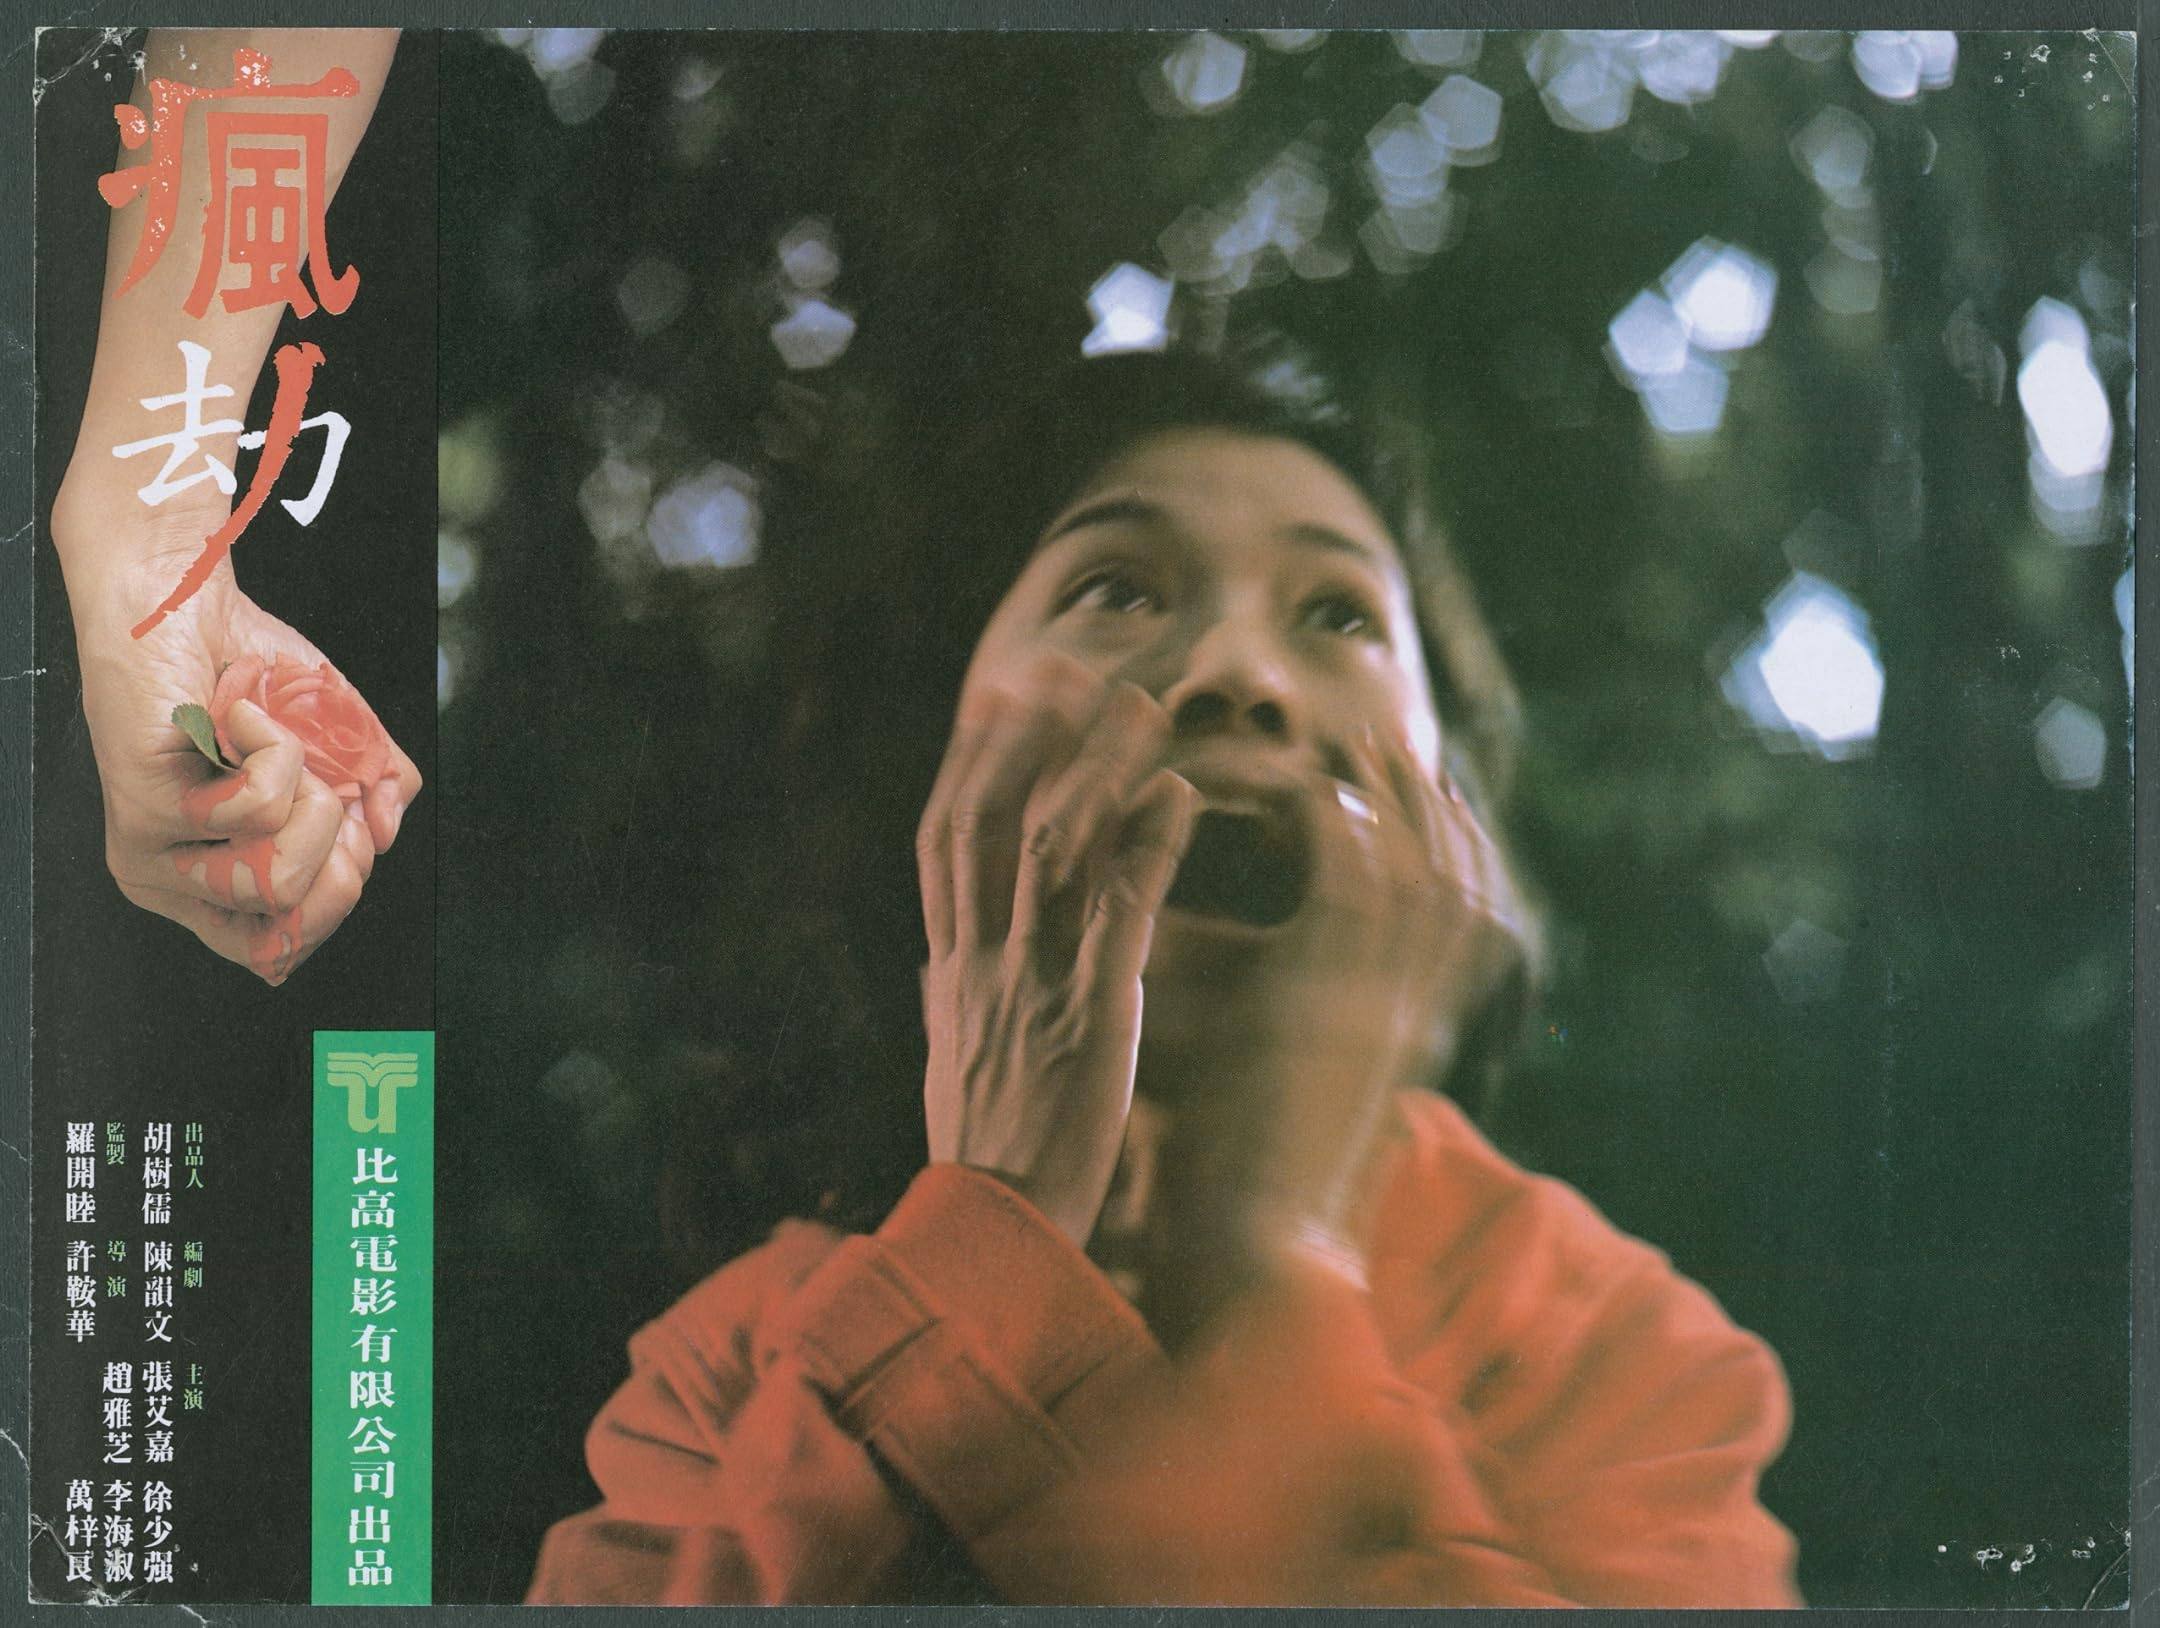 Angie Chiu in a still from The Secret. Ann Hui’s 1979 film directing debut, starring Sylvia Chang, helped usher in the Hong Kong New Wave cinema movement.